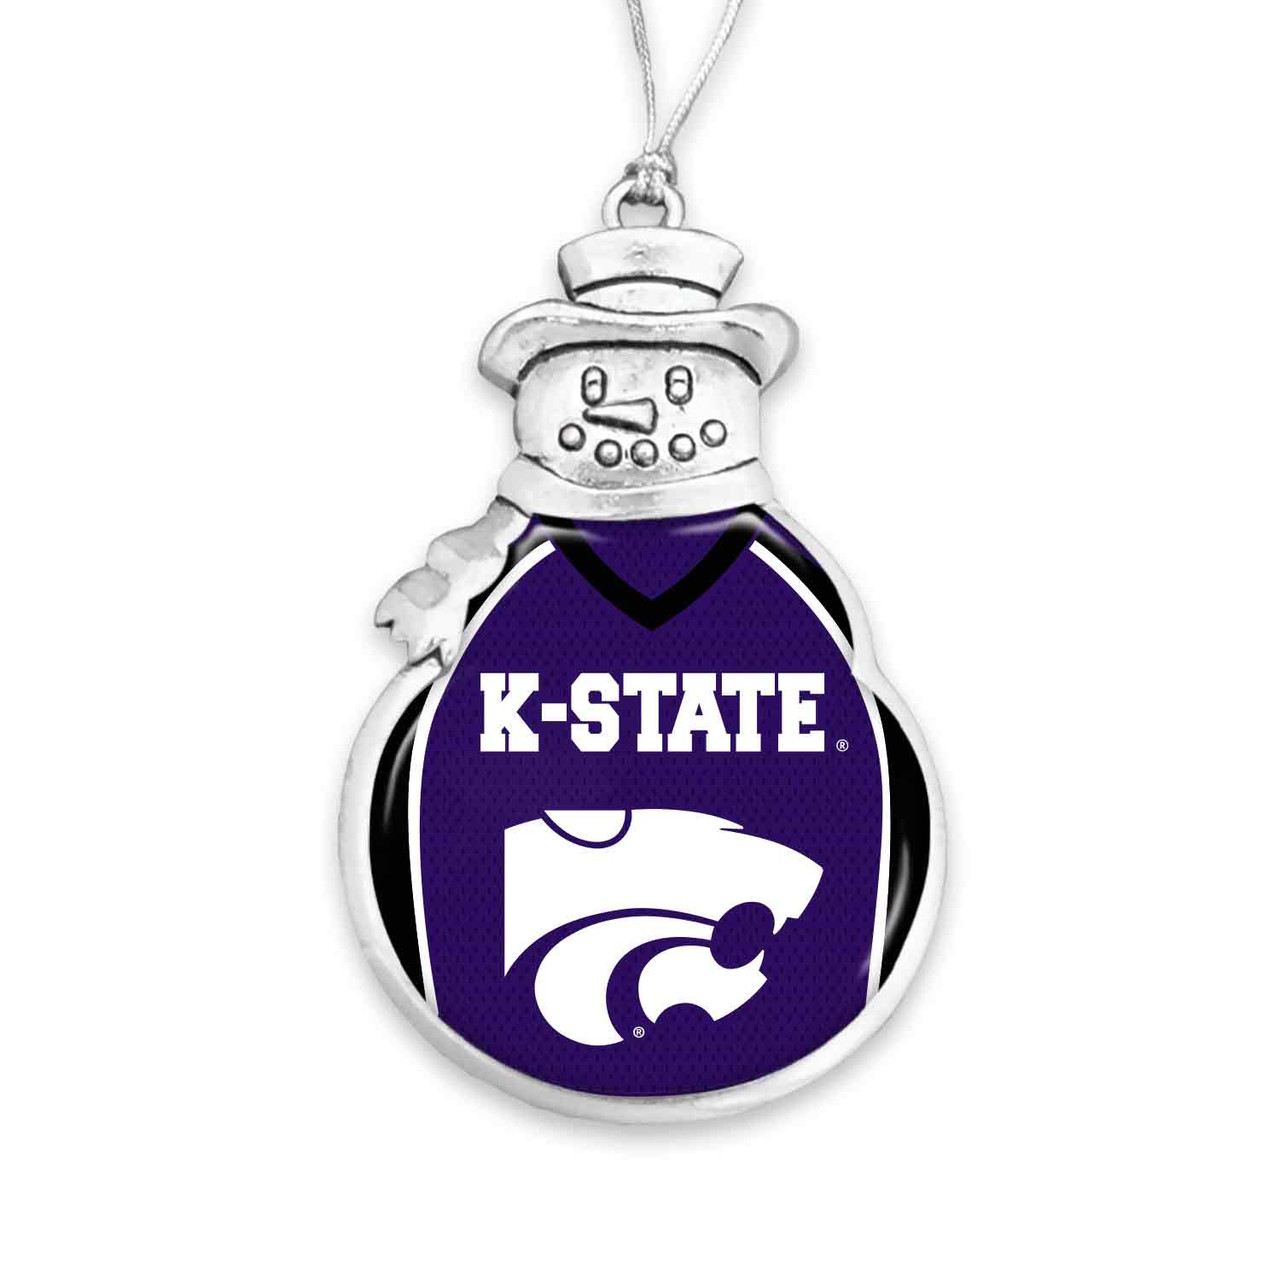 Kansas State Wildcats Snowman Ornament with Football Jersey